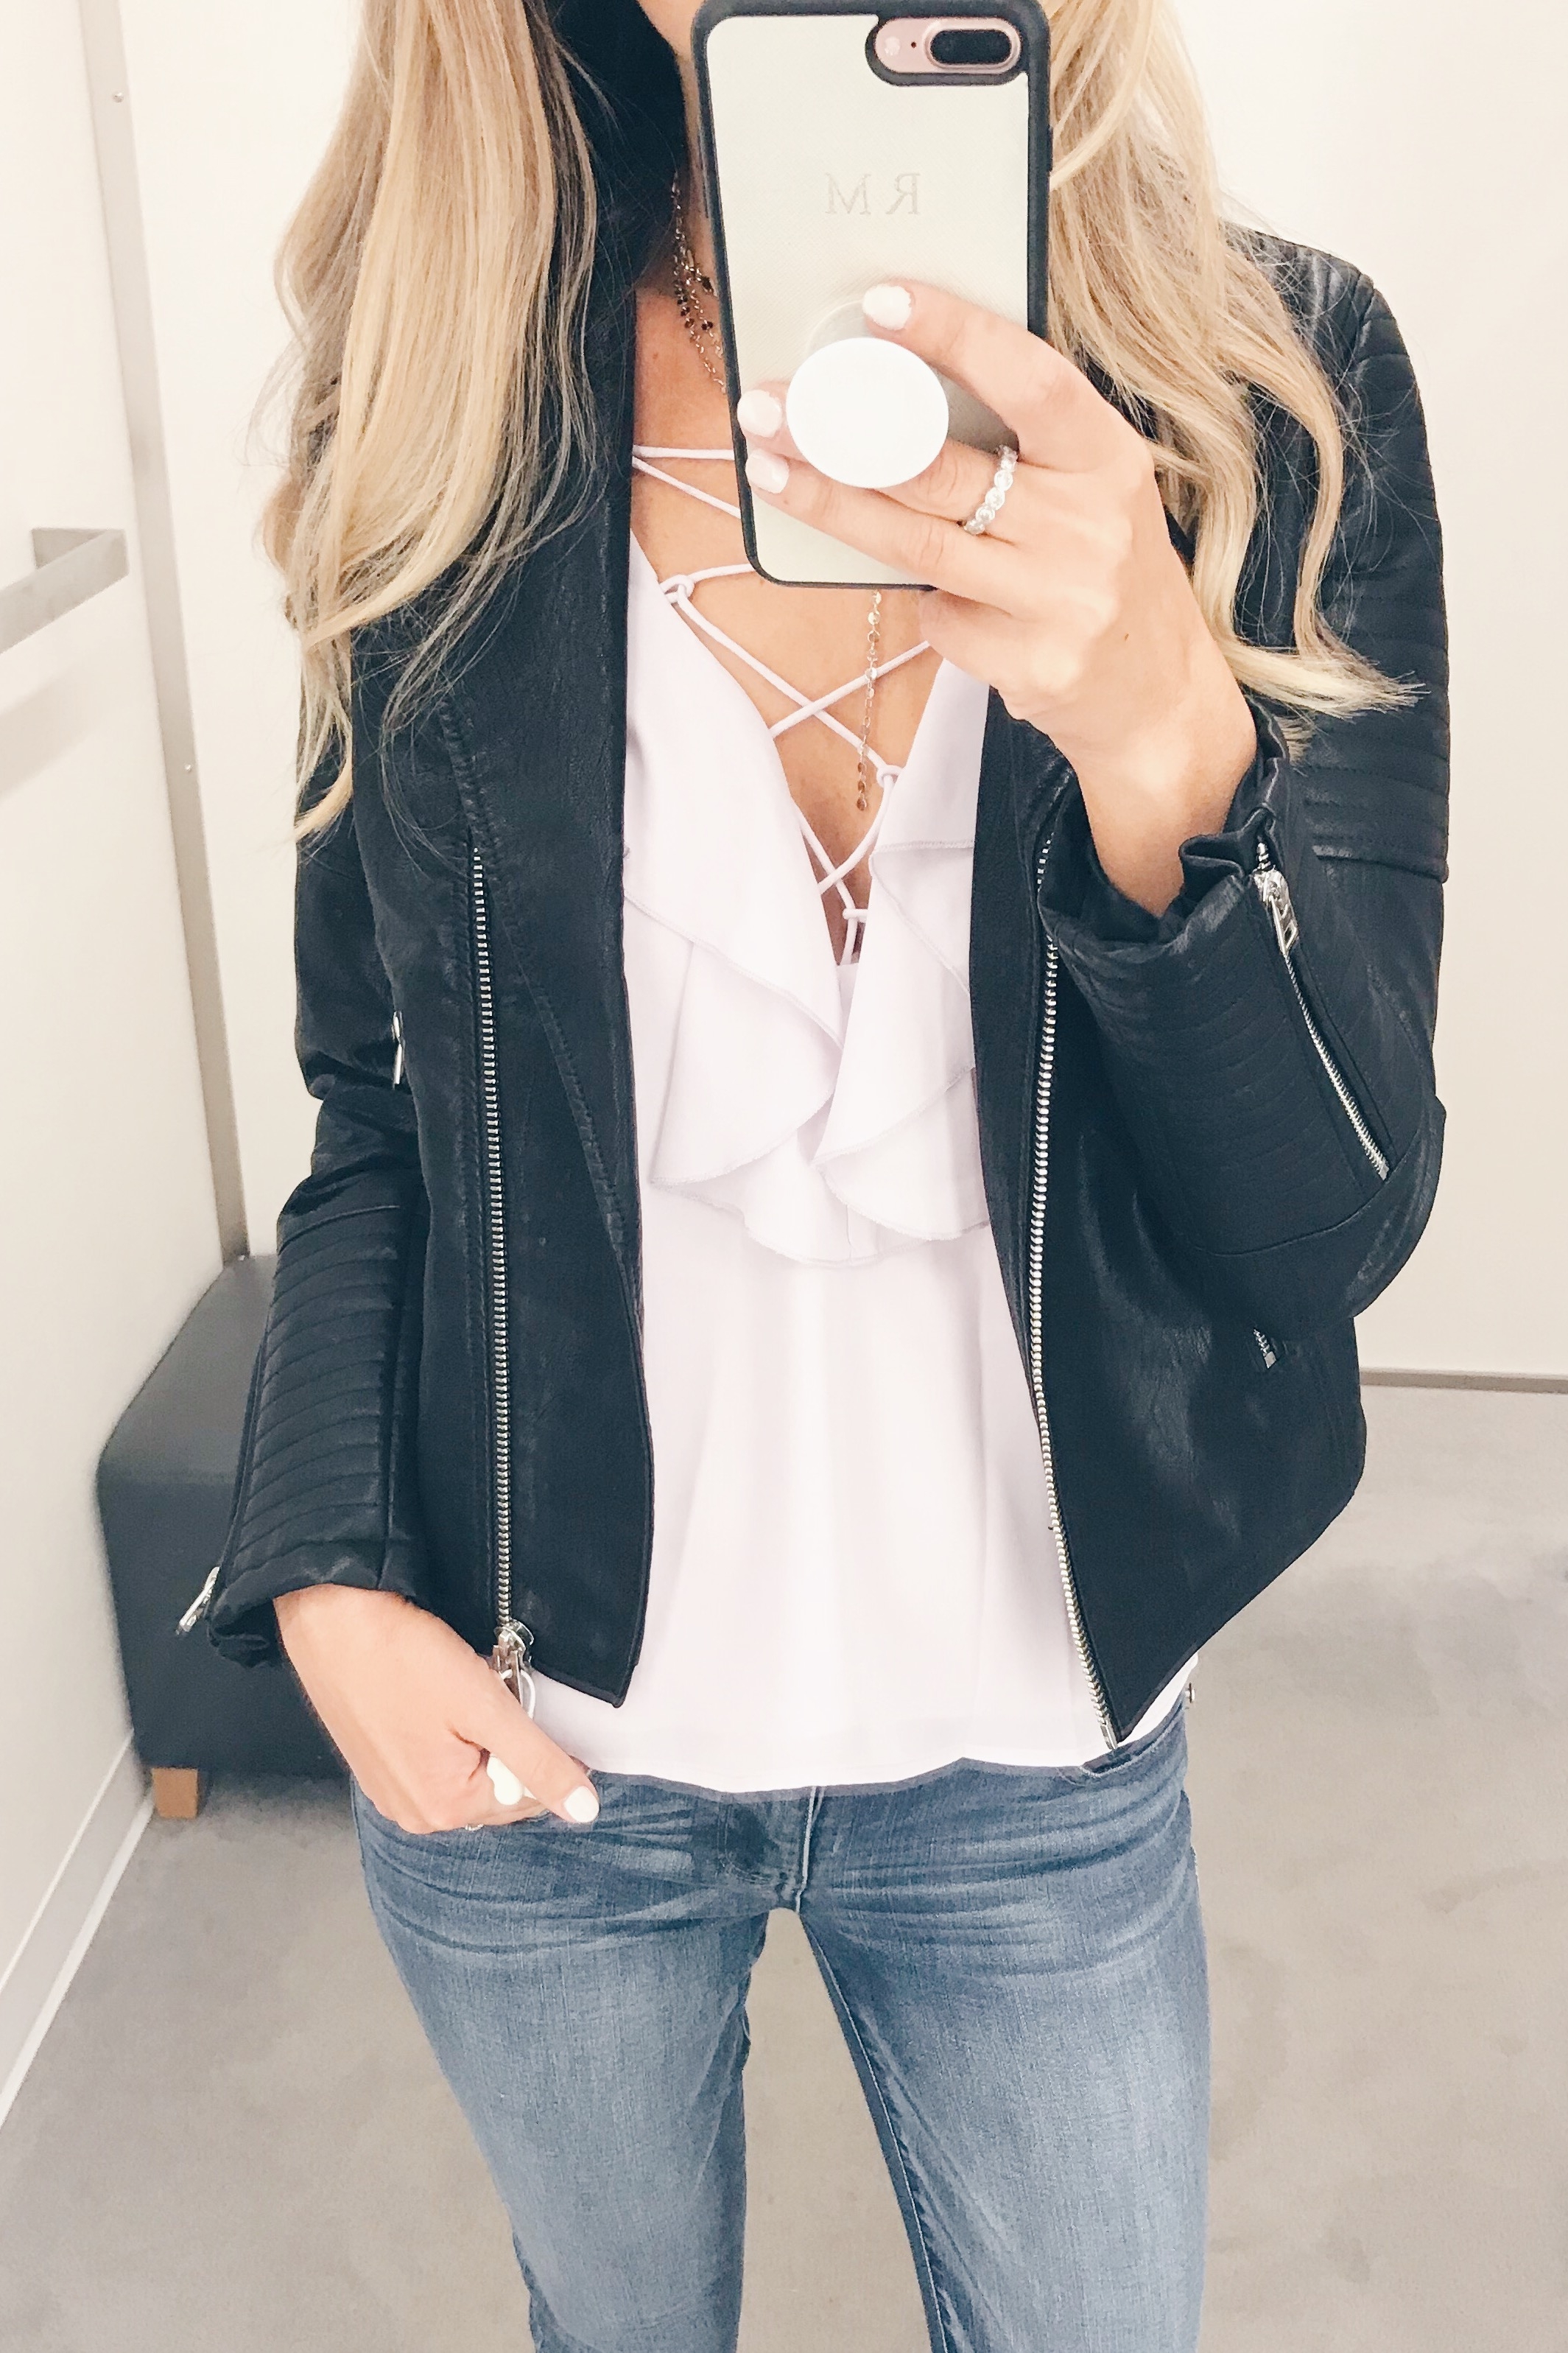 Nordstrom Anniversary Sale 2018 Dressing Room Outfits - Moto Jacket/ Tie Up Top